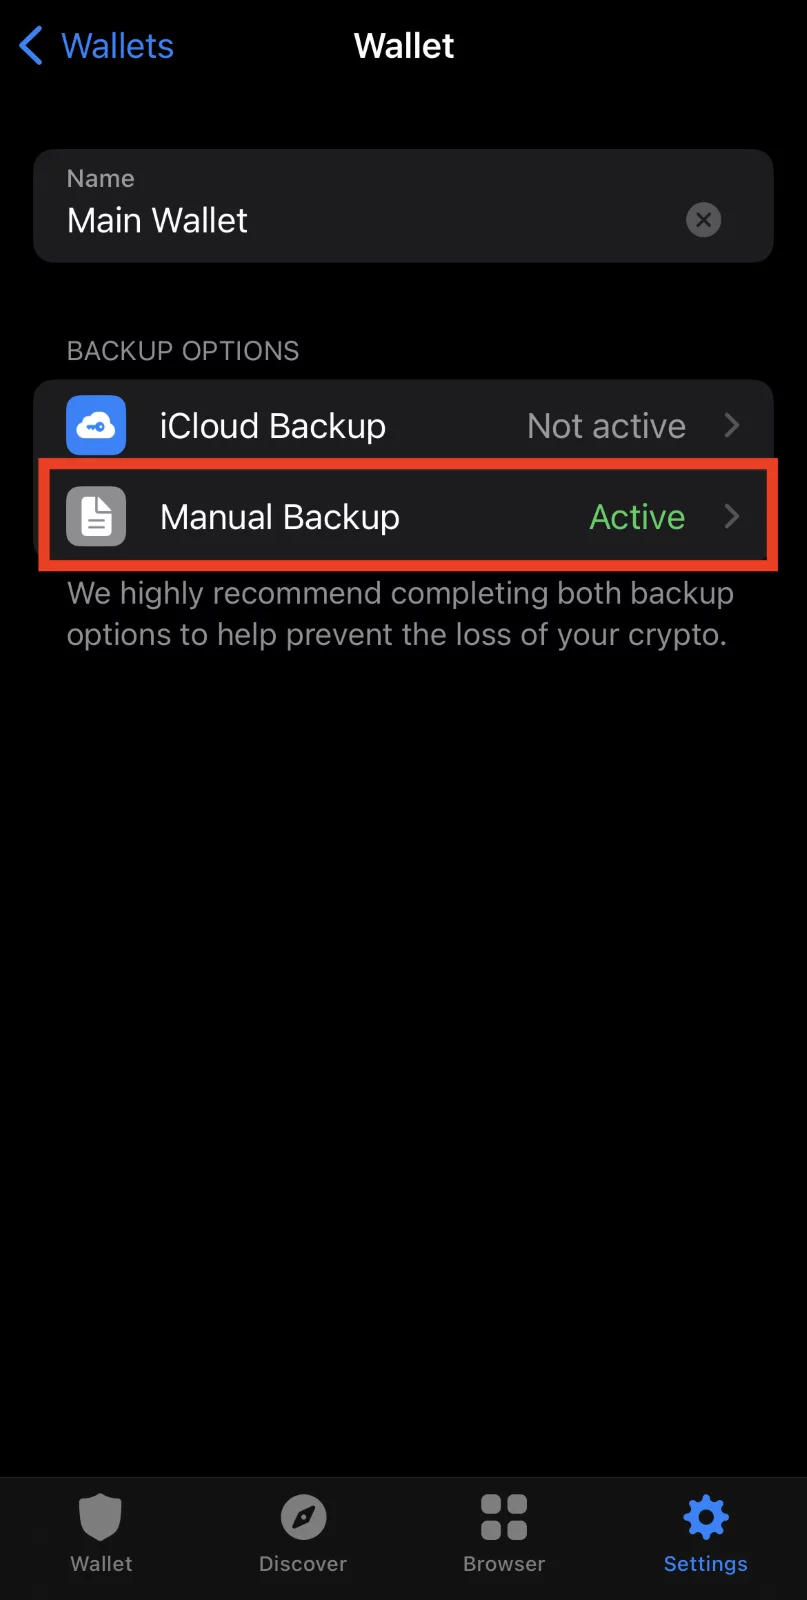 Step 4. Opt for Manual Backup 